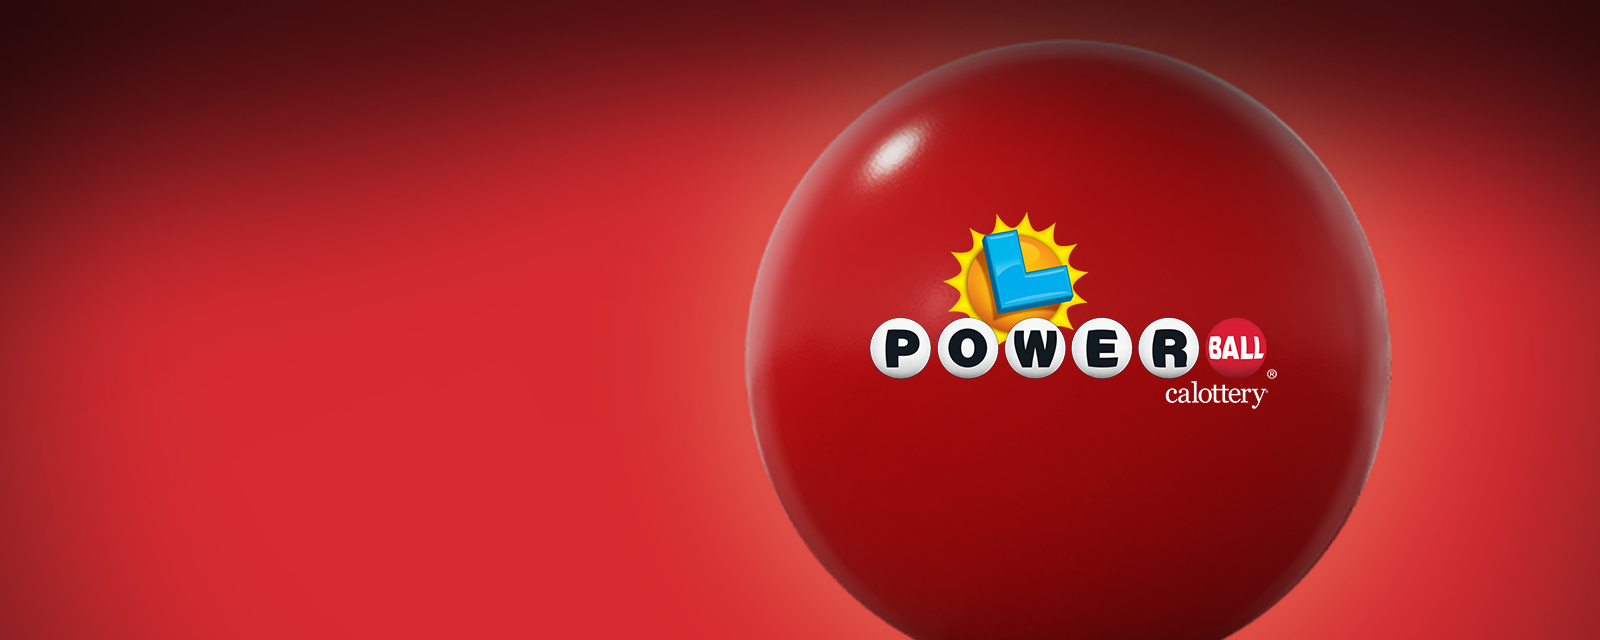 A red background with a big red ball. The ball has the Powerball logo on it